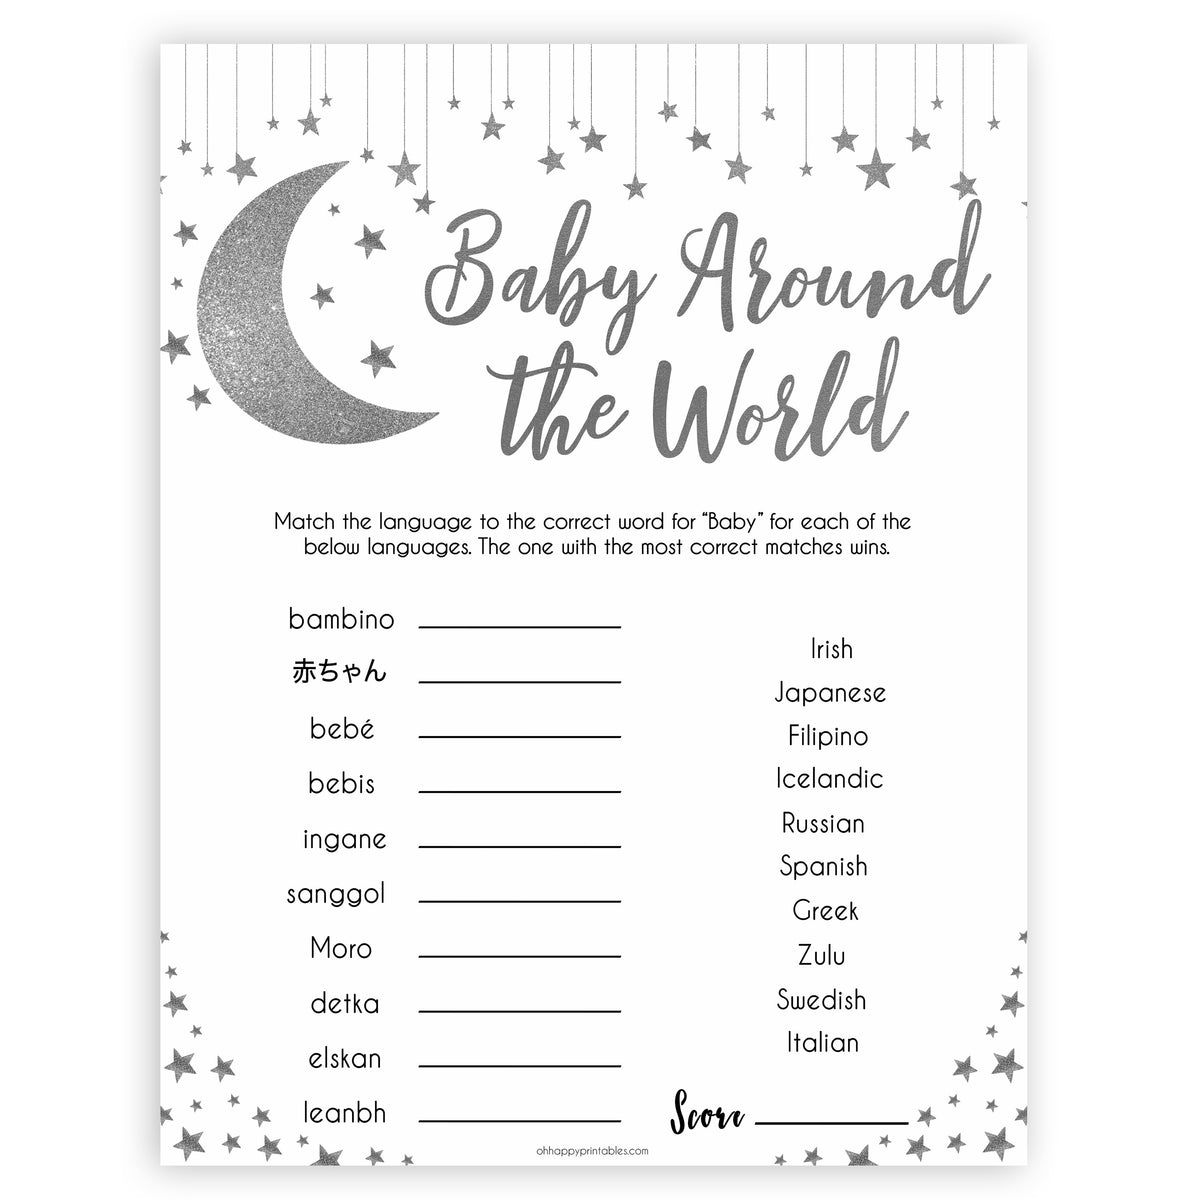 Silver little star, baby around the world baby games, baby shower games, printable baby games, fun baby games, twinkle little star games, baby games, fun baby shower ideas, baby shower ideas